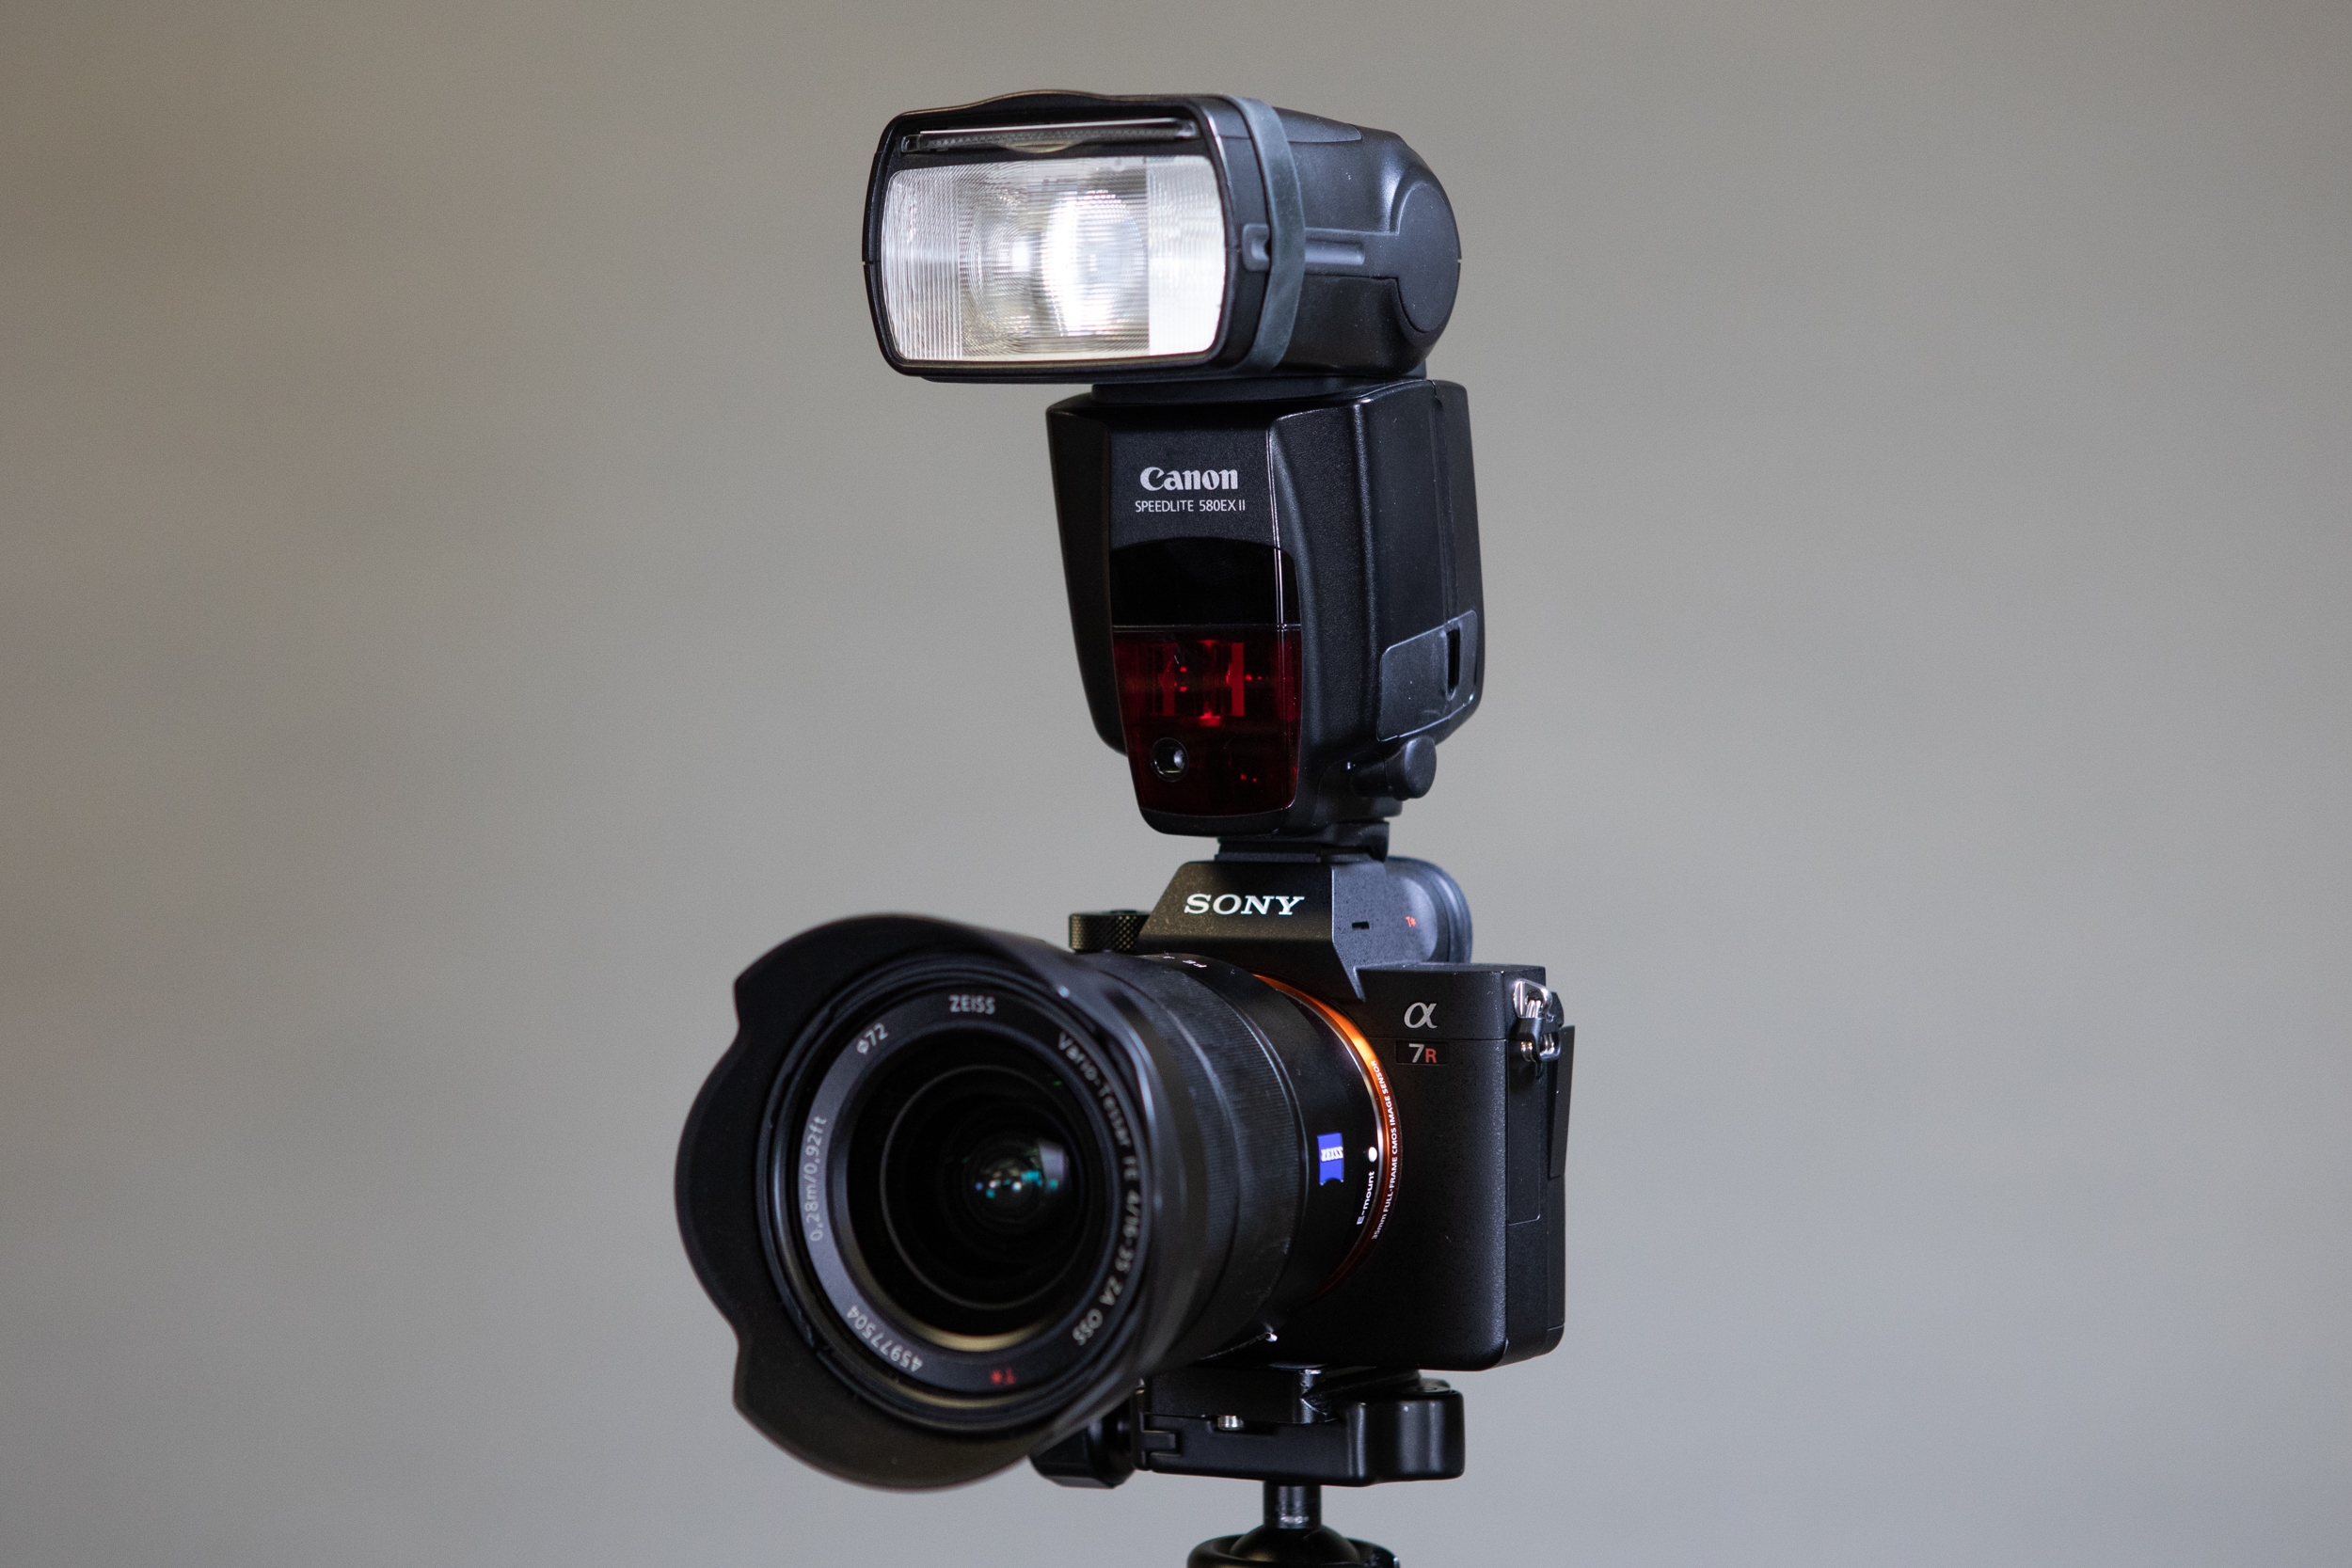 Canon Speedlite Flash with a Sony A7R III